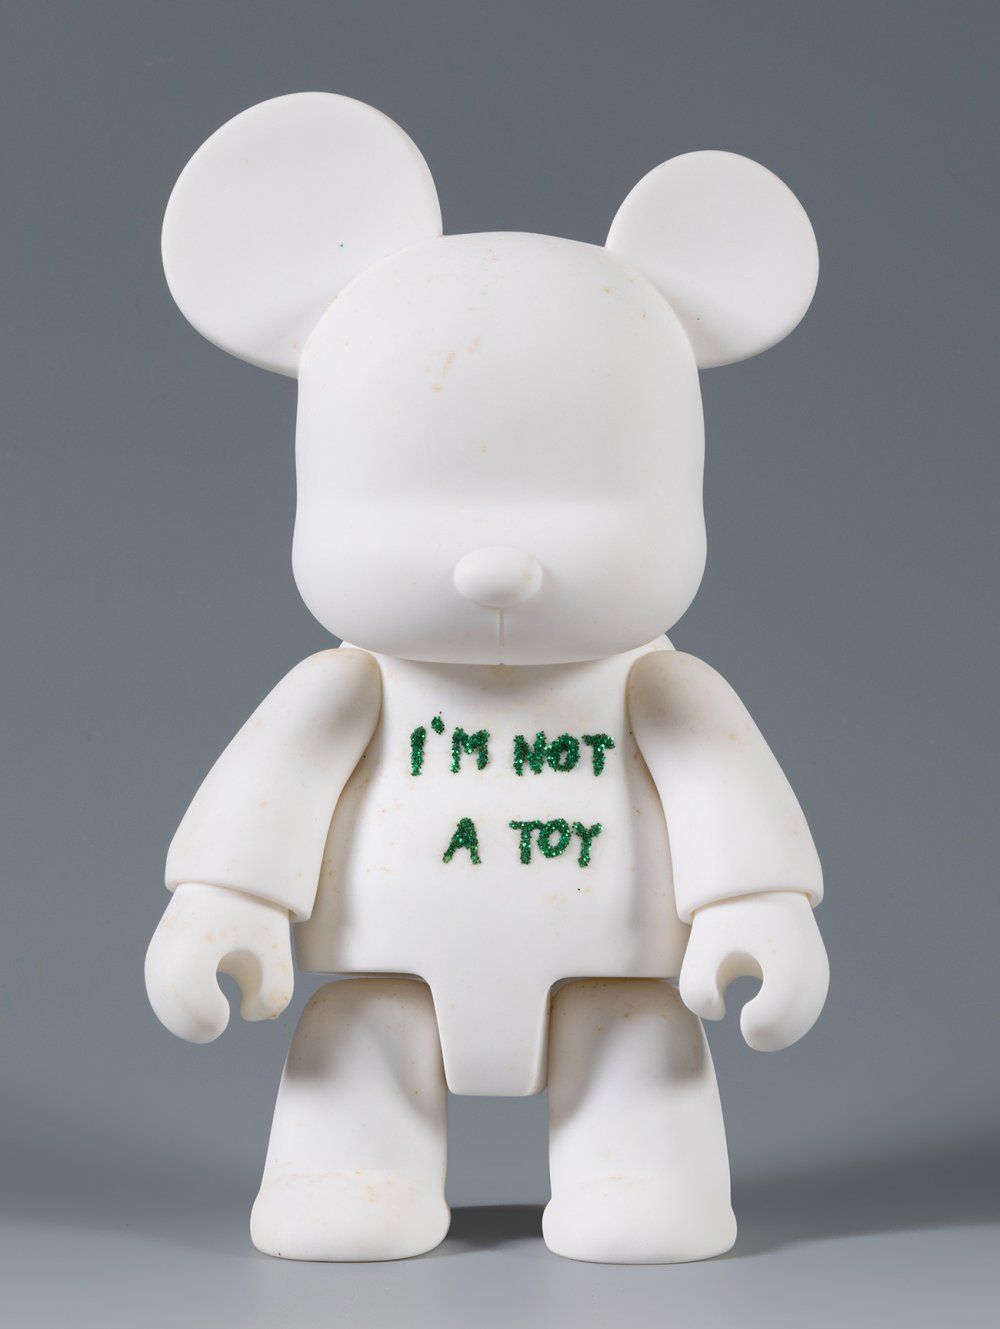 Null VALENTINA MIORANDI (Italy, 1982).
Toy 2r "Im not a toy of yours", 2012.
Pai&hellip;